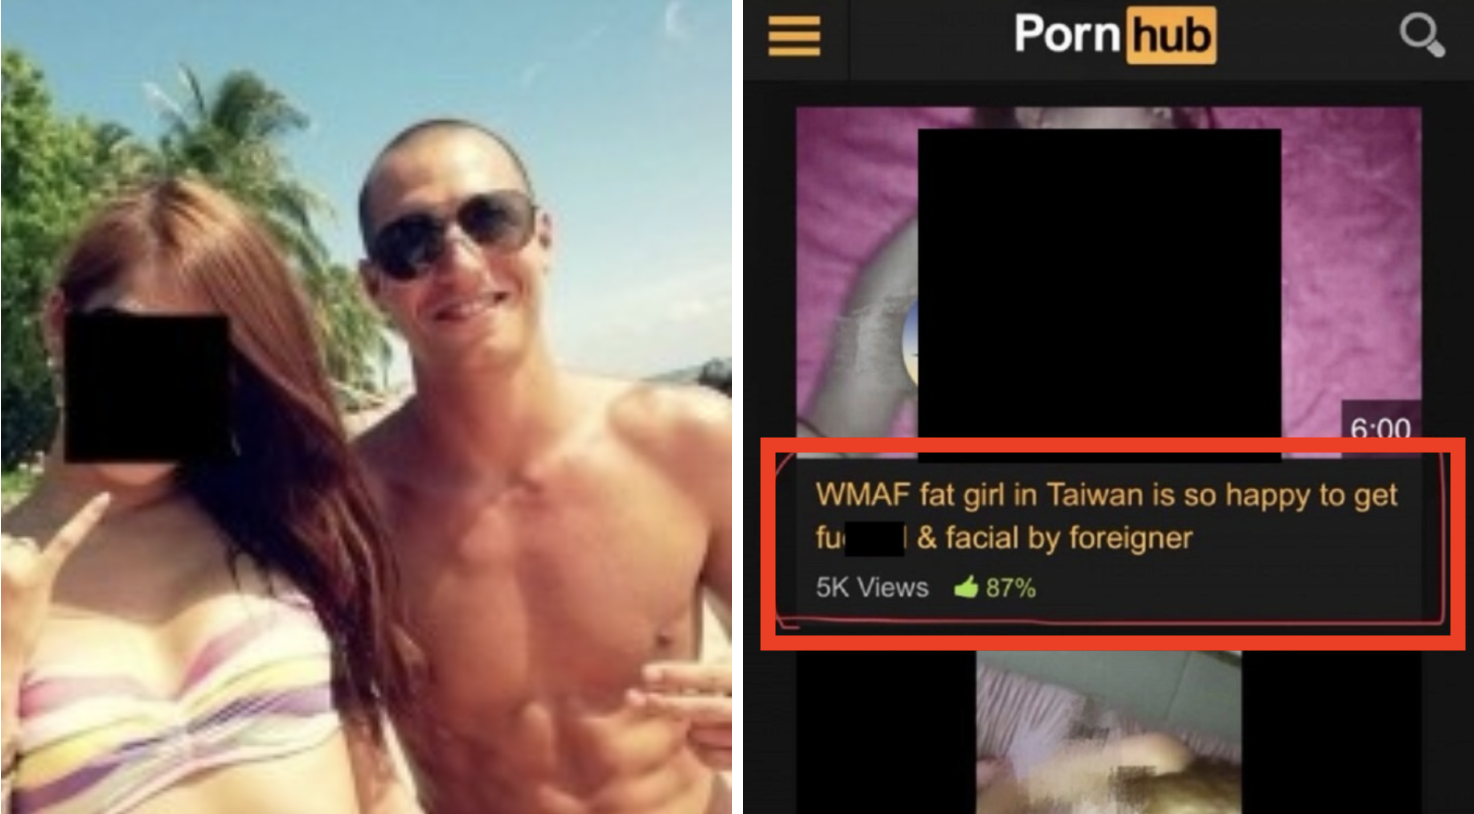 MMA Fighter Who Secretly Films Sex With Asian Women Now Back on Pornhub Selling Videos pic